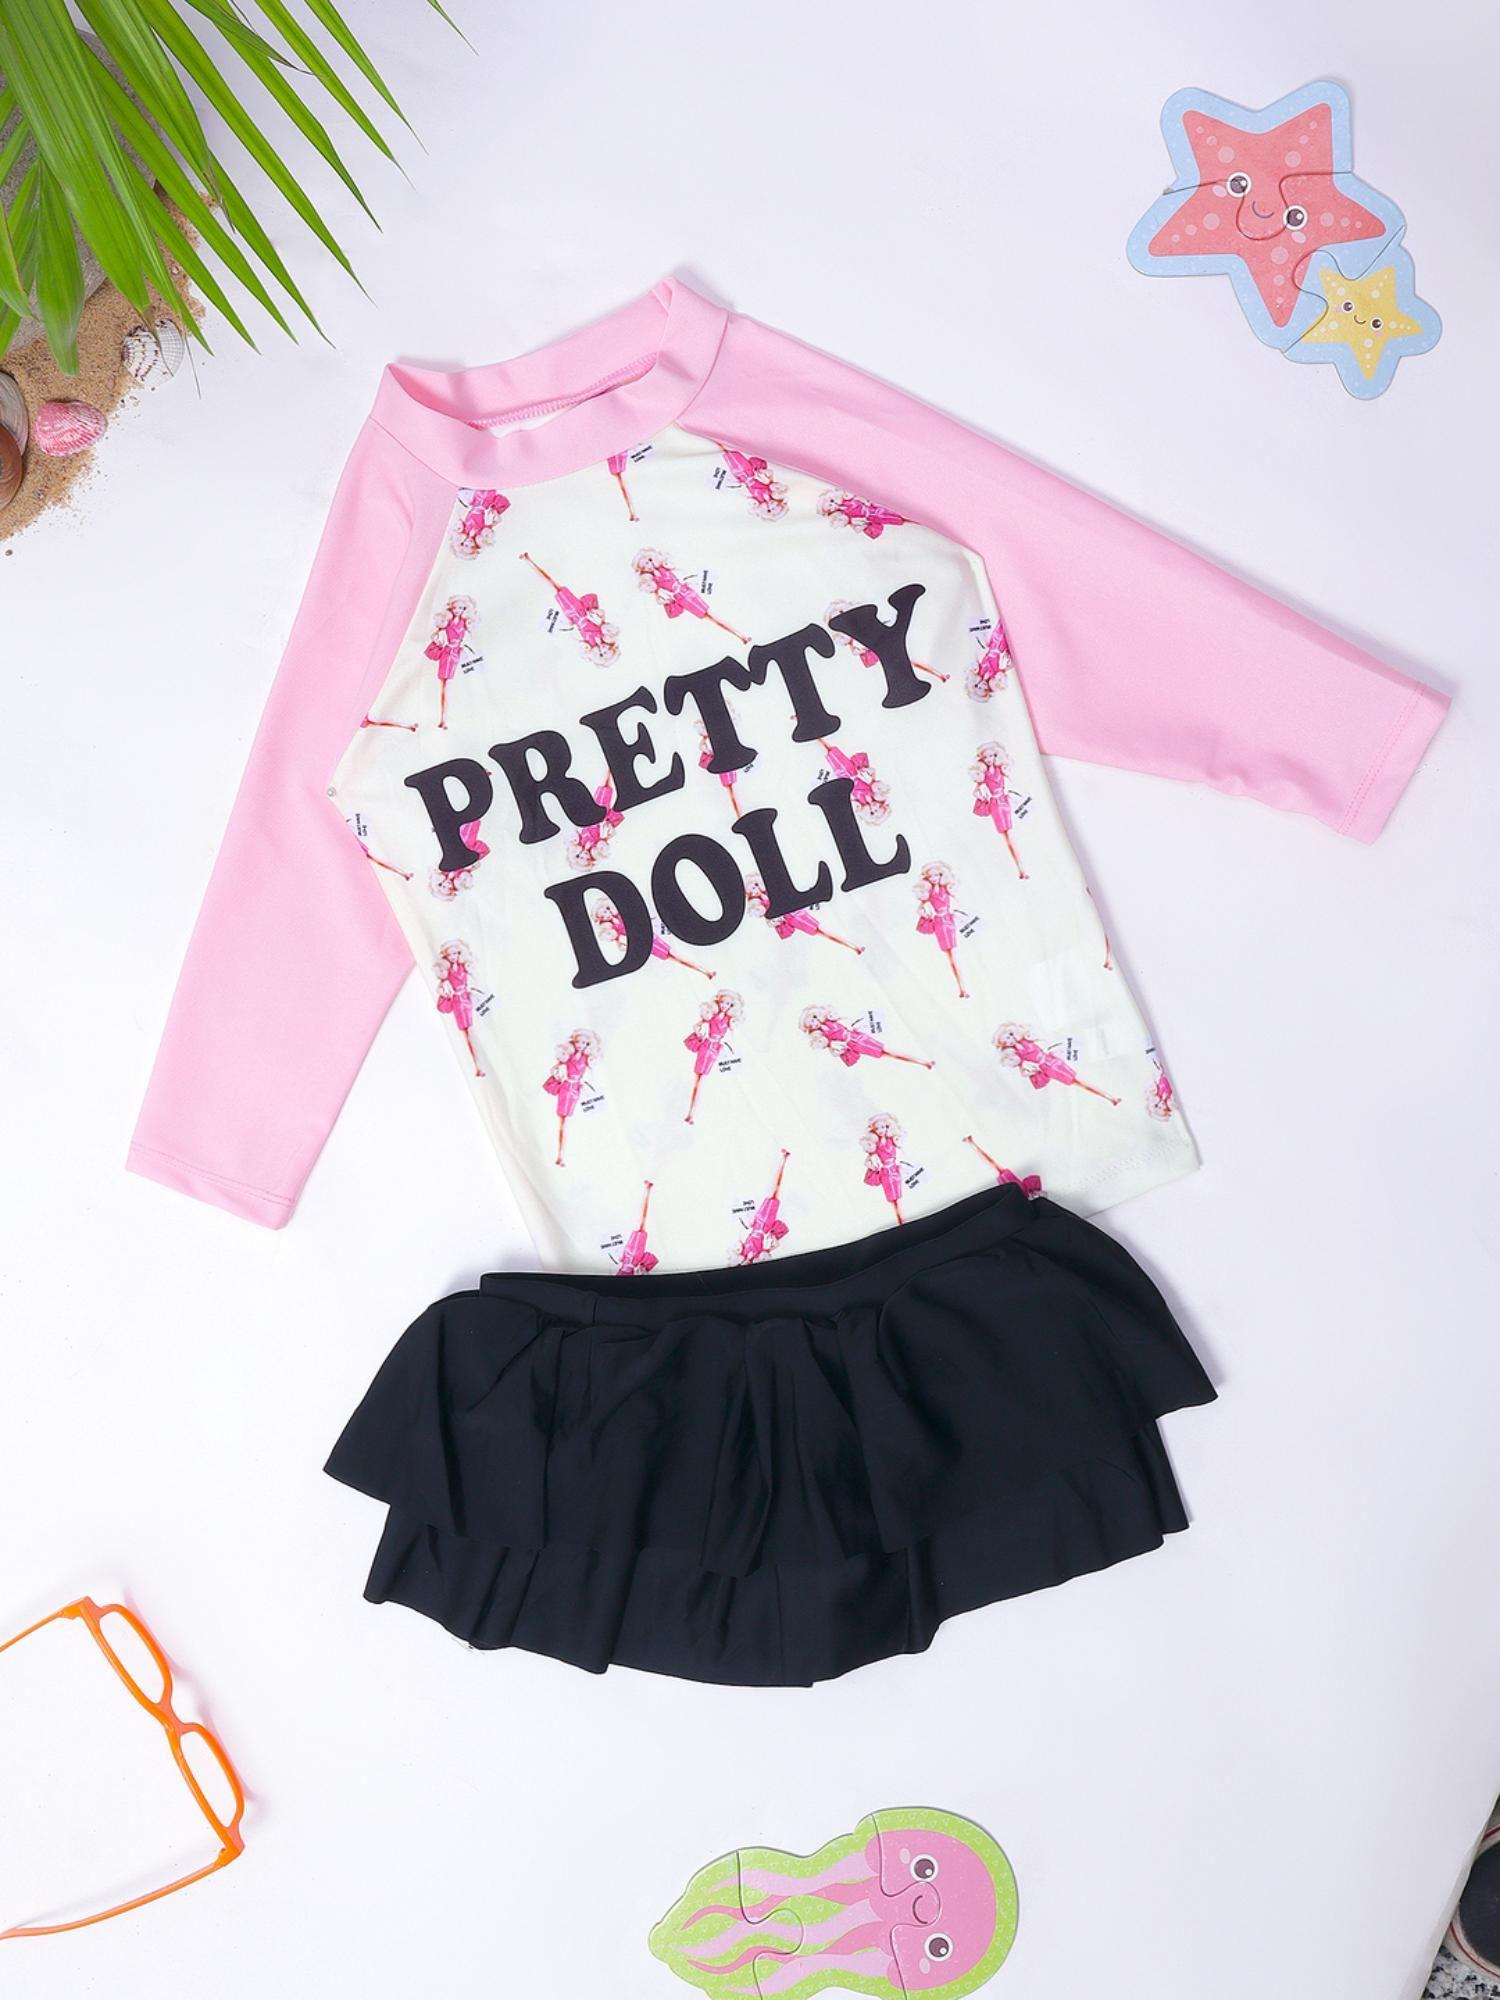 swimming costume white black pink doll skirt with t-shirt (set of 2)